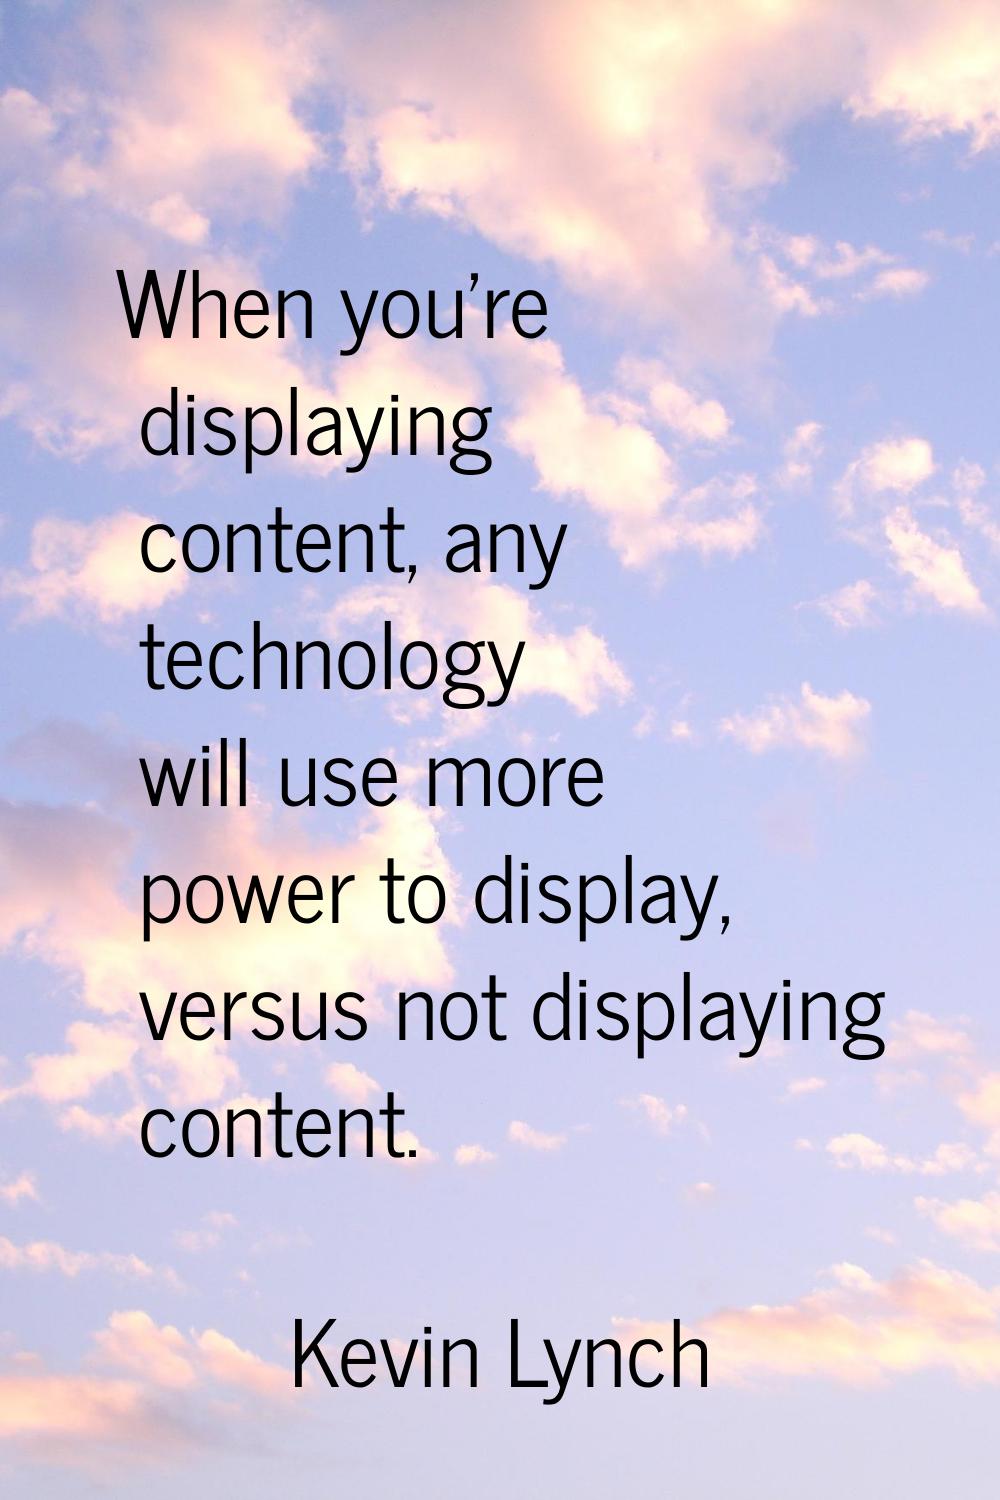 When you're displaying content, any technology will use more power to display, versus not displayin